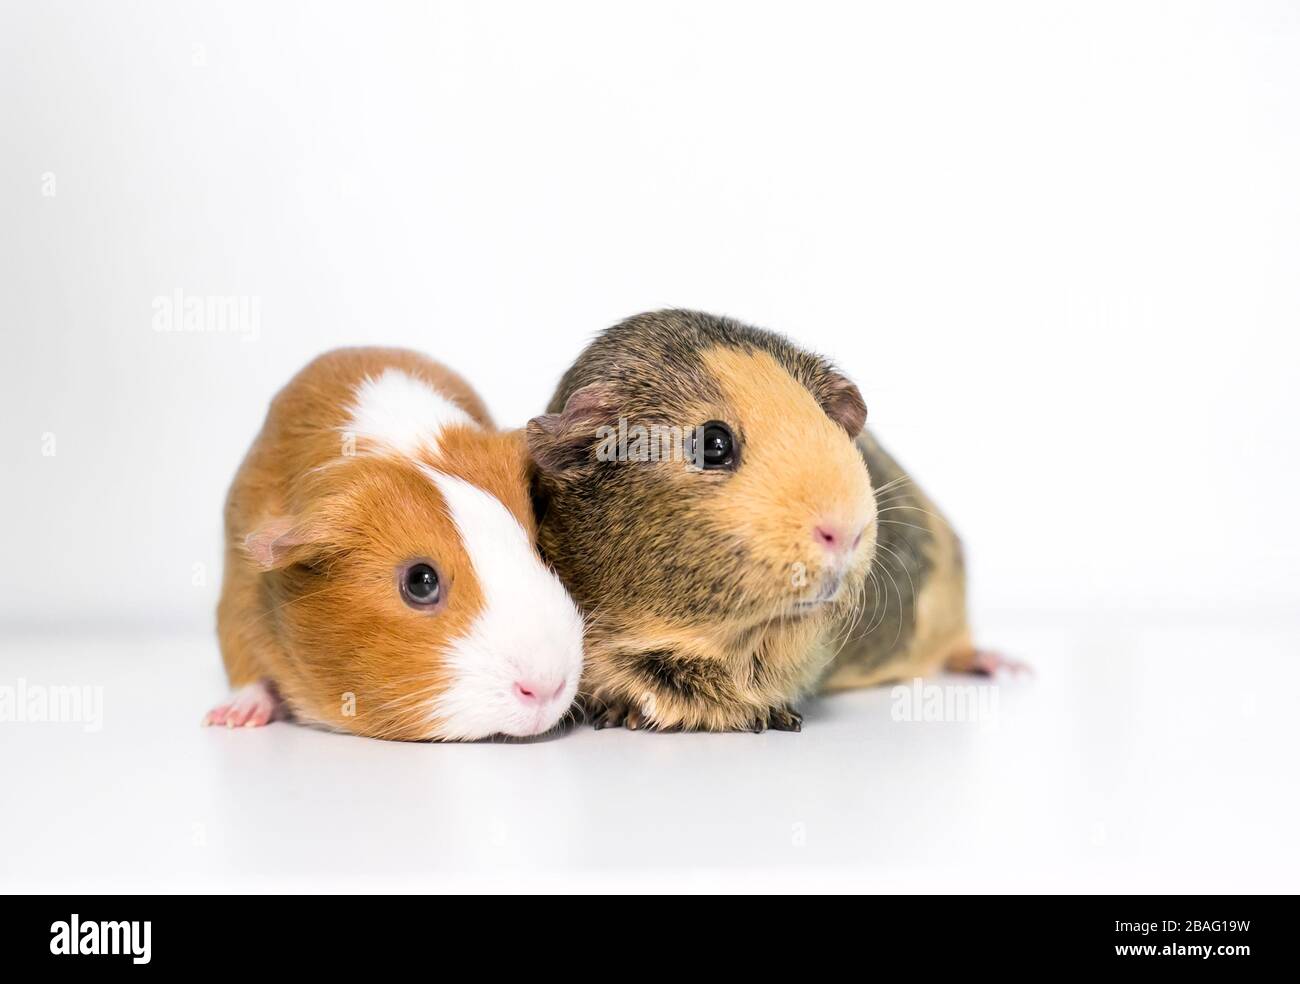 Two American Guinea Pigs (Cavia porcellus) together on a white background Stock Photo